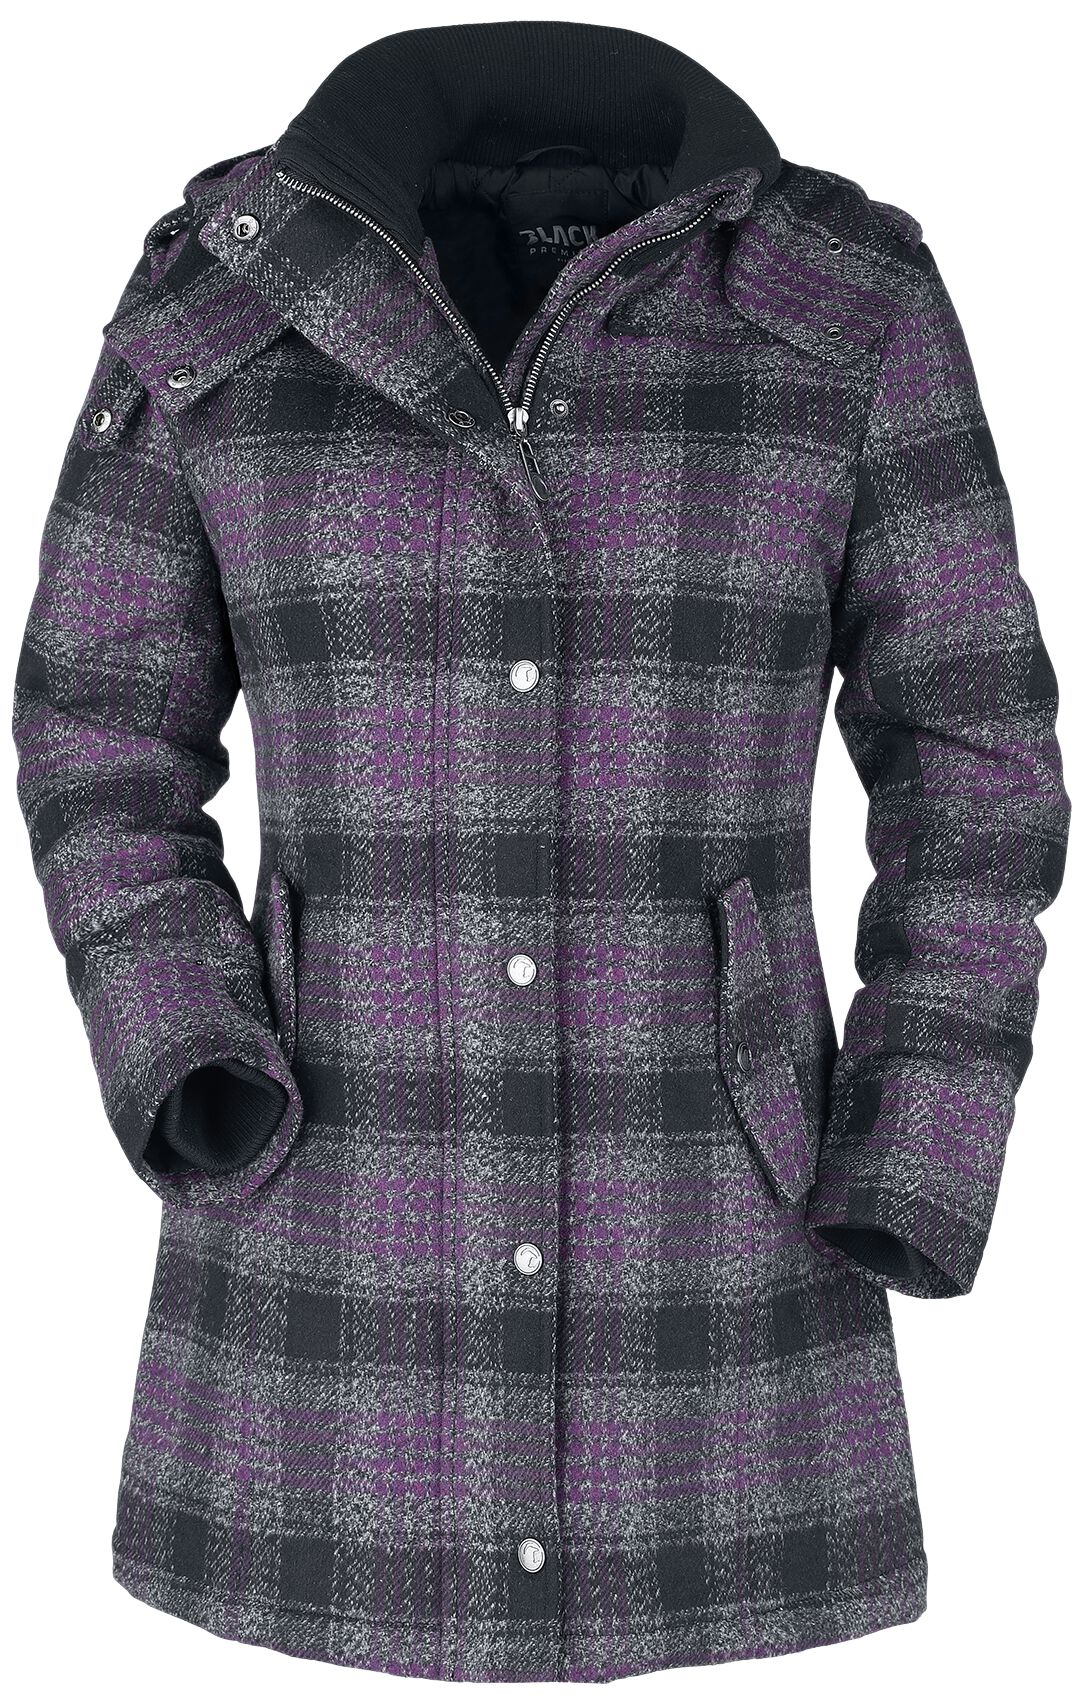 Image of Giacca invernale di Black Premium by EMP - Short coat with chequered pattern - S a 5XL - Donna - nero/viola